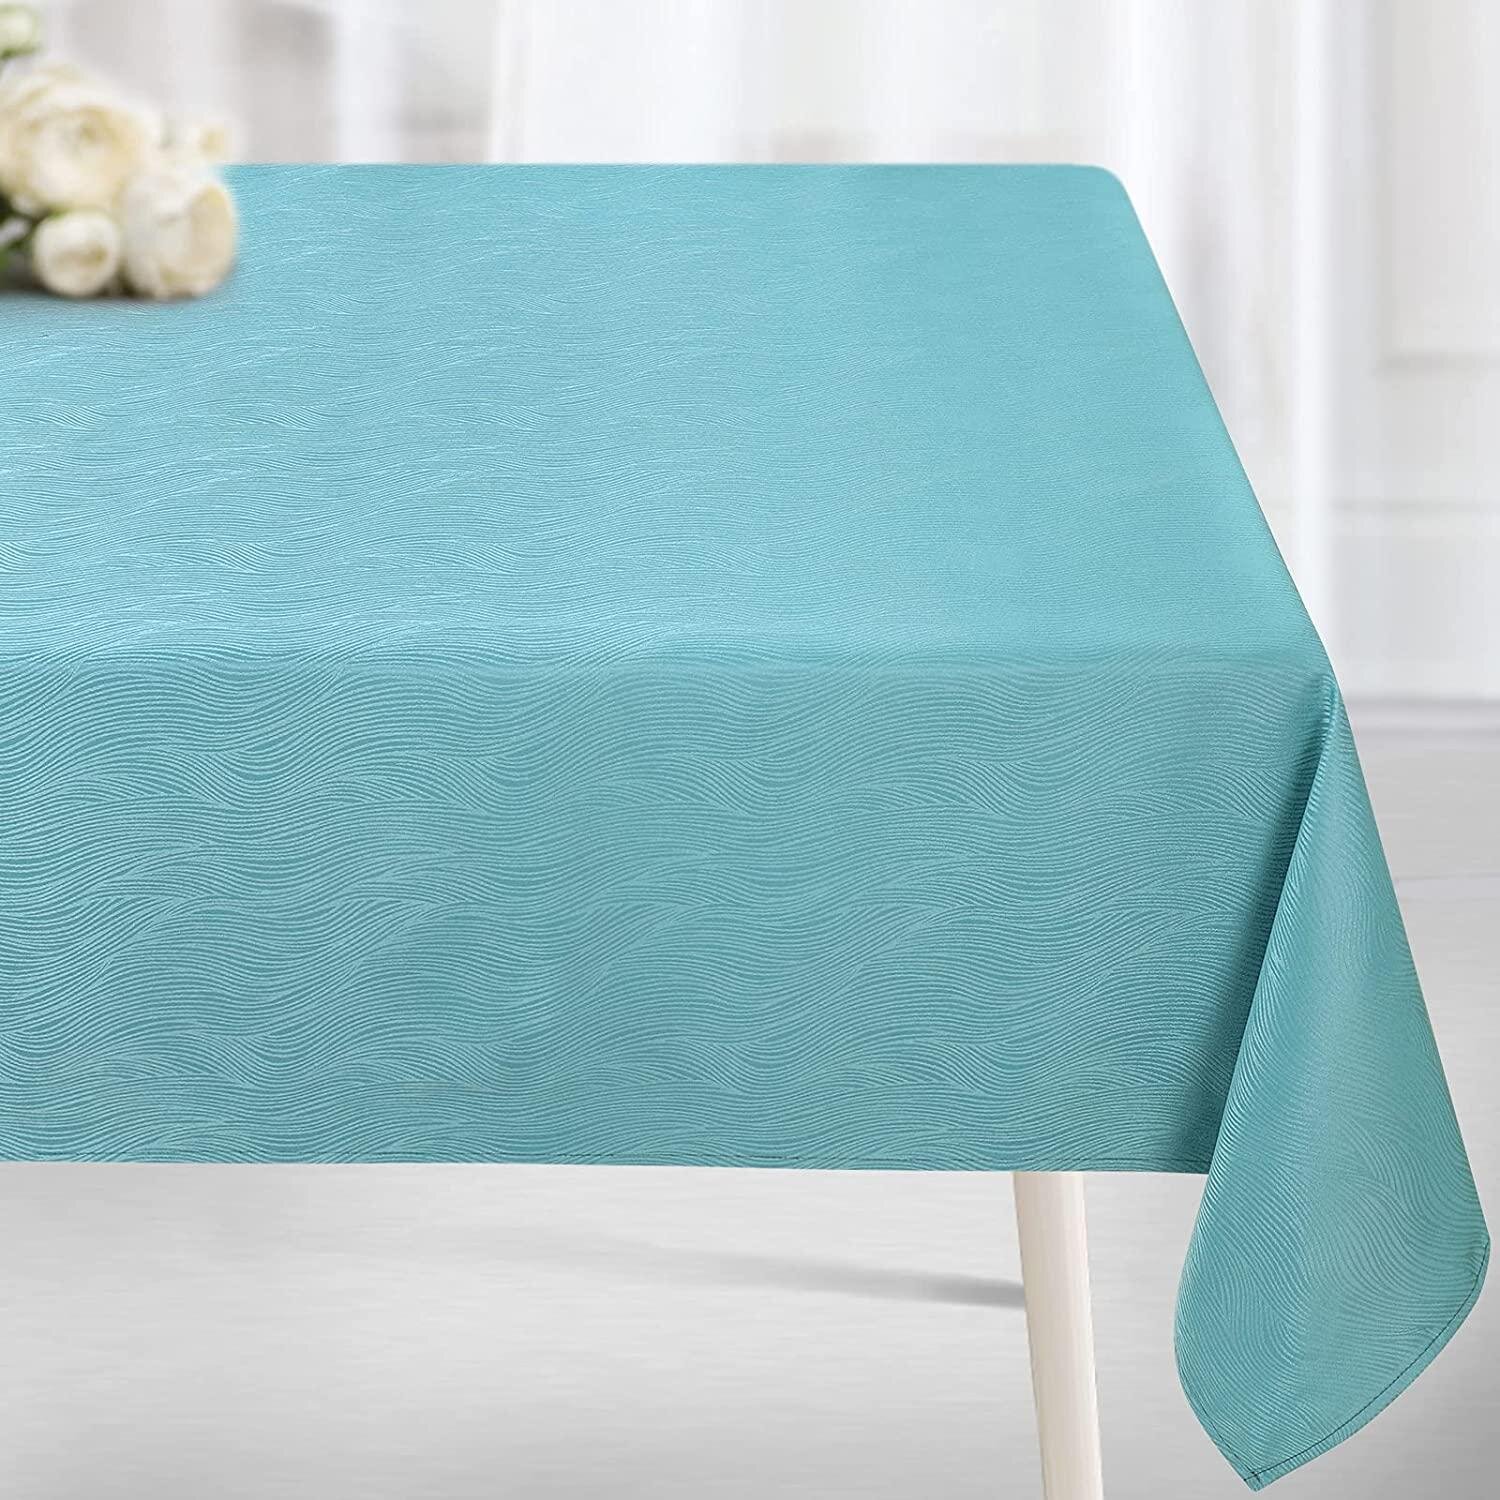 LINEN LOOK TEAL TABLE CLOTHS TURQUOISE PLAIN BIRTHDAY PARTY CHRISTMAS OCCASIONS